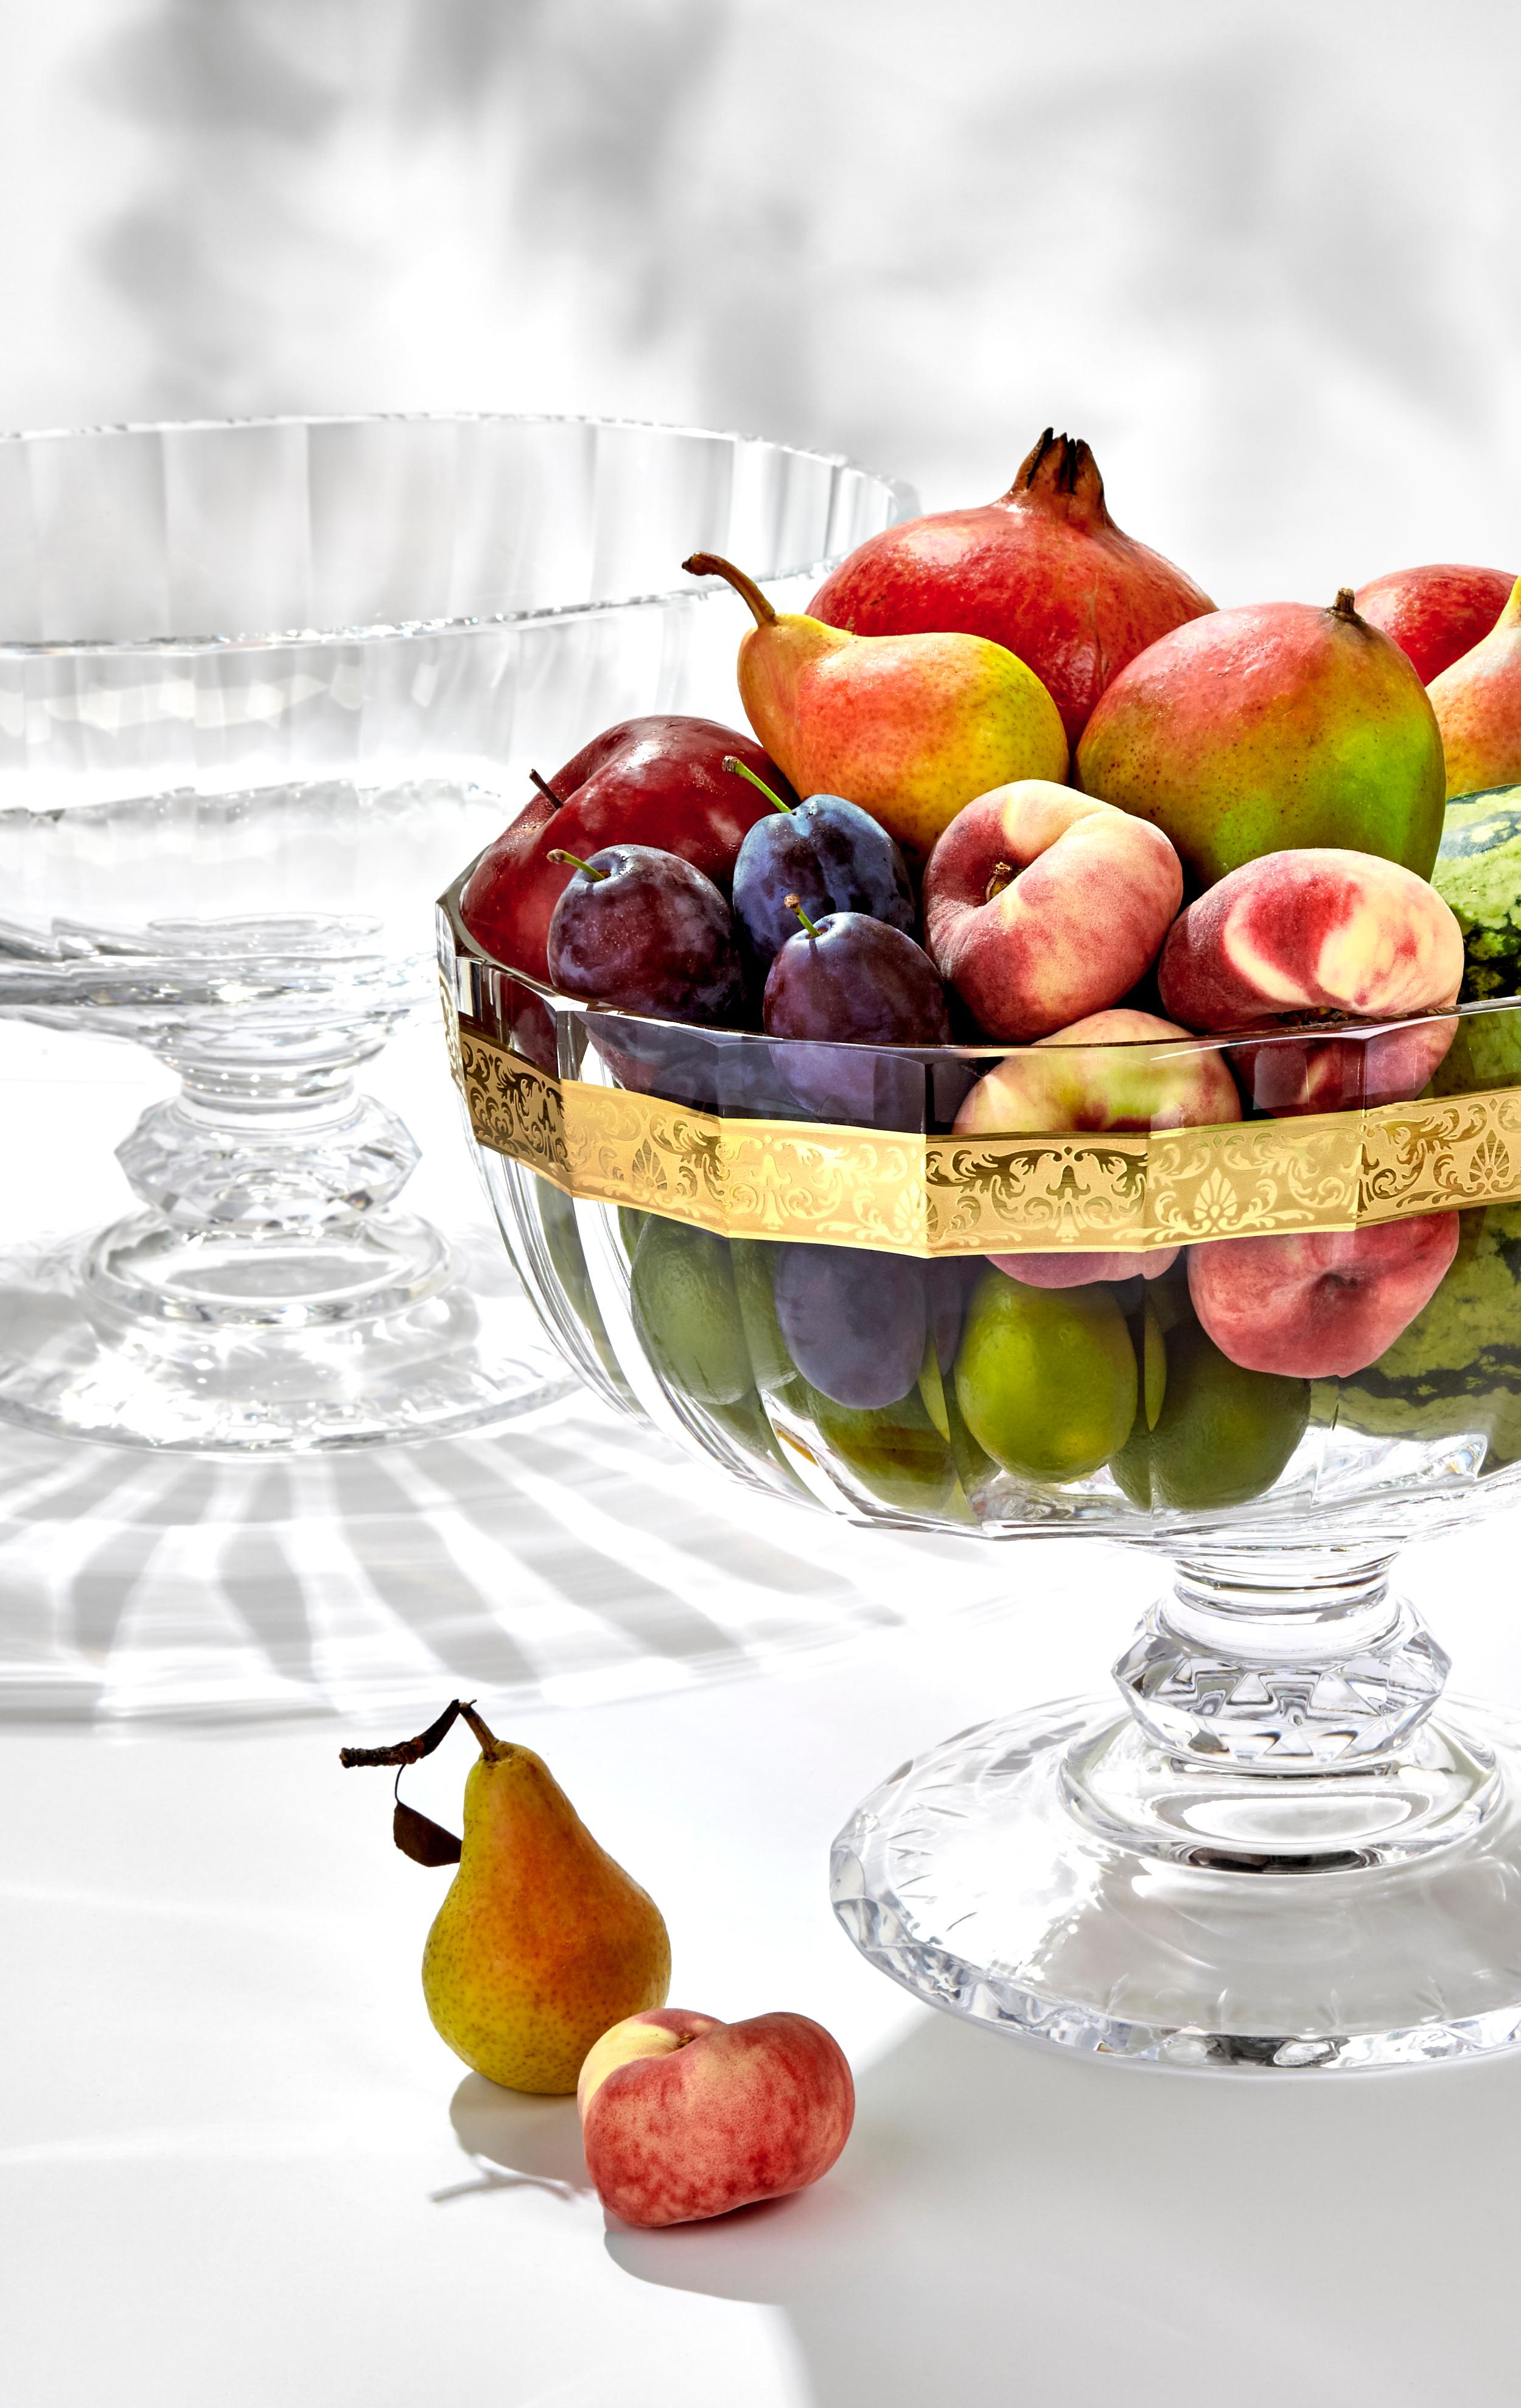 This unique cut-glass bowl is a true jewel created by the Moser glassmakers, cutters, engravers and other master craftsmen. It is modelled on a Baroque table collection used at the Viennese imperial court during the reign of Maria Theresa. In